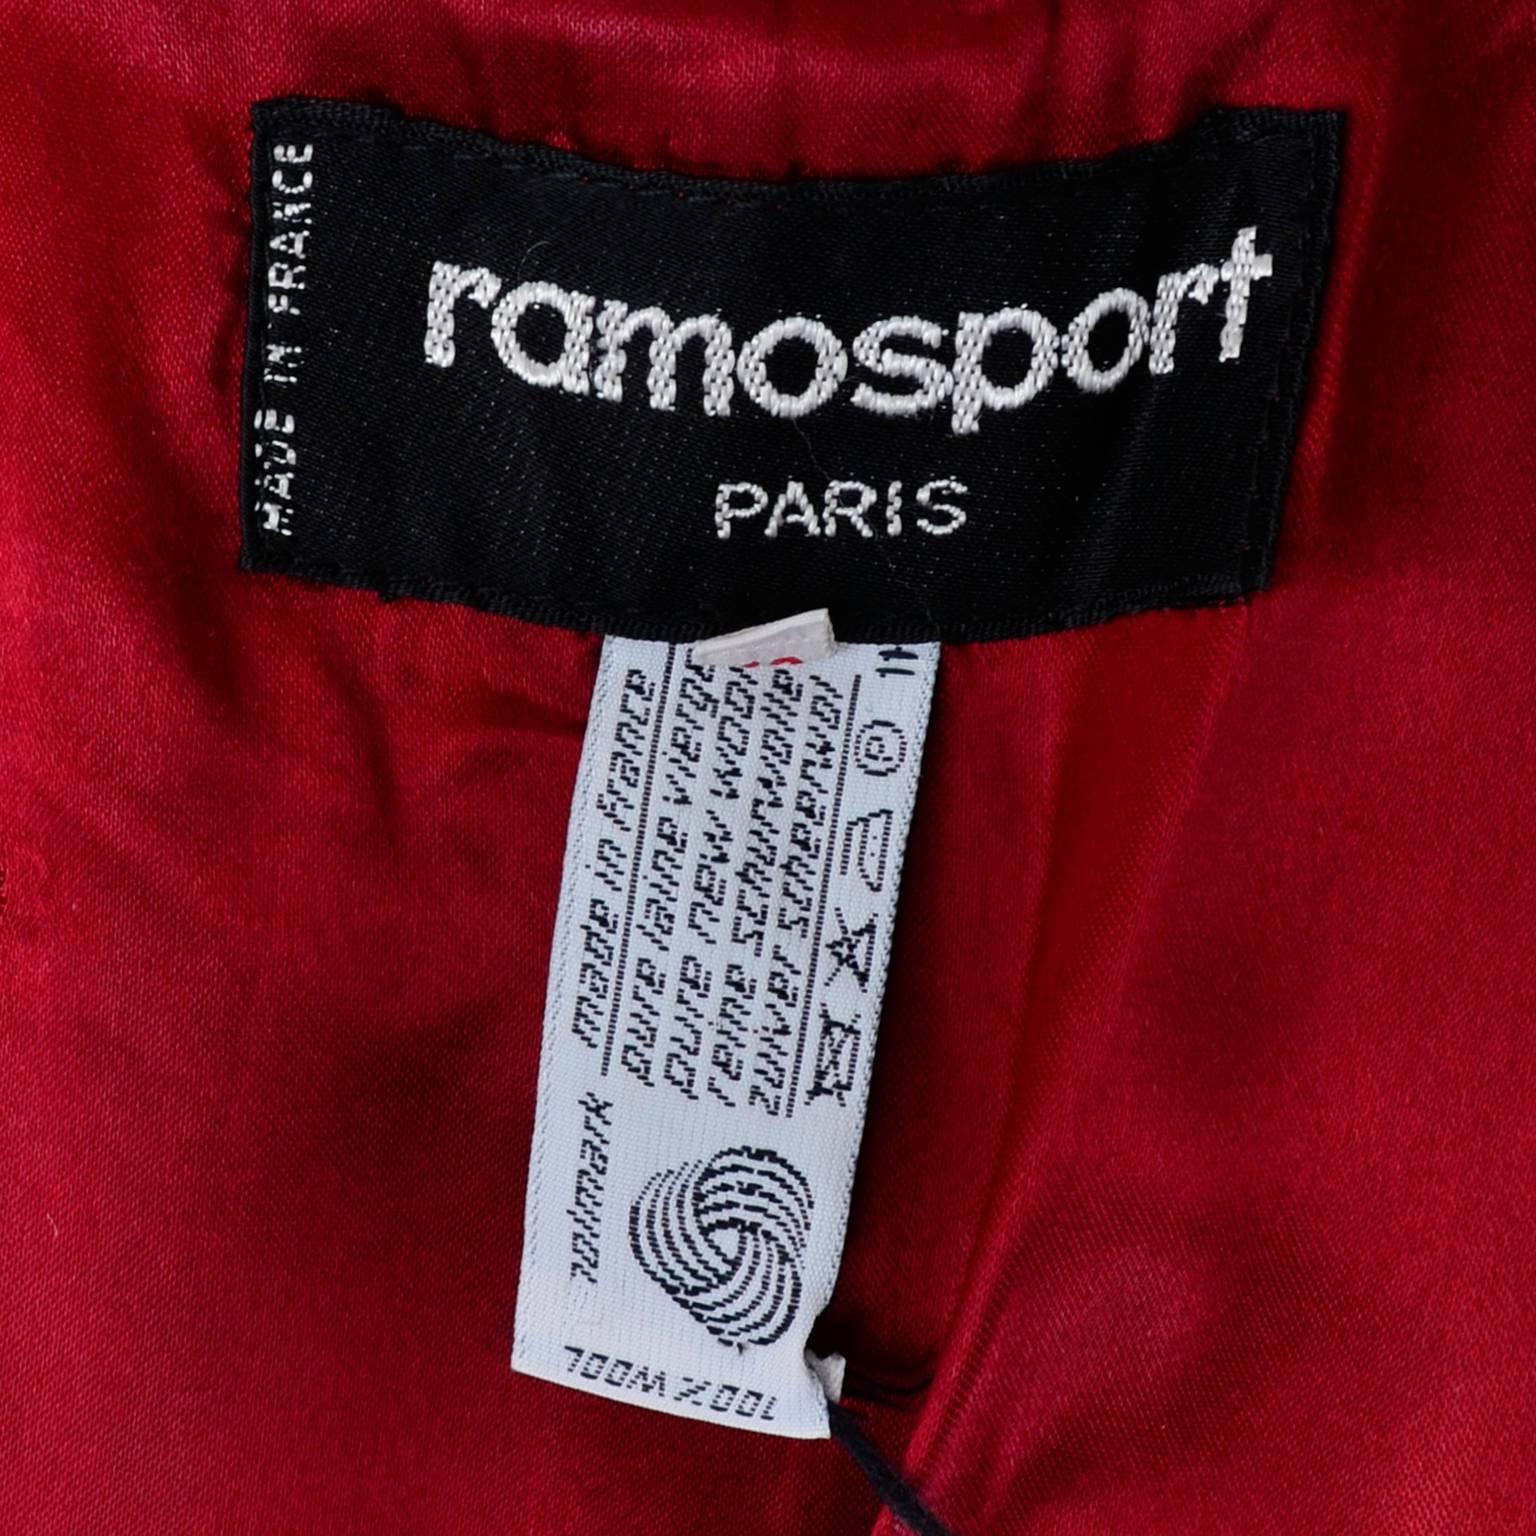 Ramosport Paris Vintage Red Wool Coat Made in France Size 40 or US 8/10 3